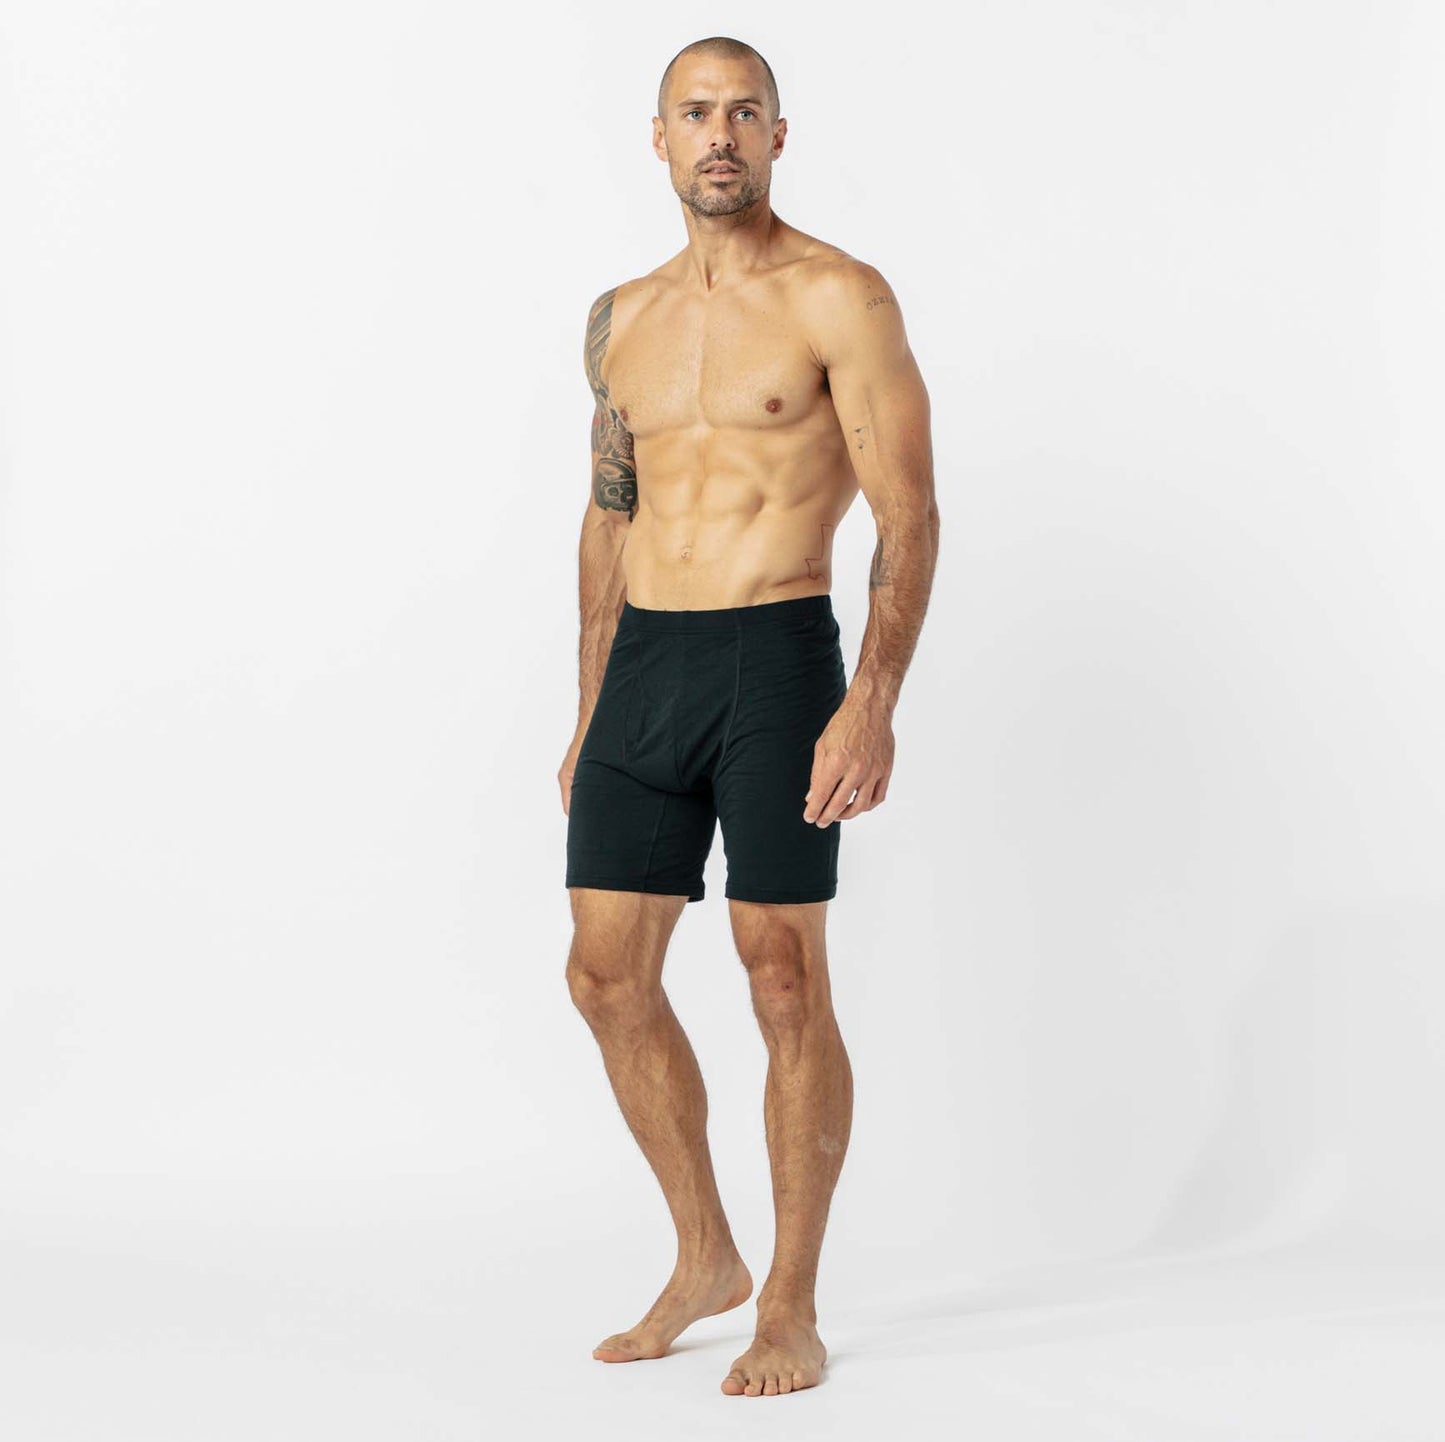 Boxer Brief - Fire (FR) and Arc Flash Resistant, Lightweight,  Moisture-Wicking Stretch Fabric (PK 2 Briefs) - National Safety Apparel